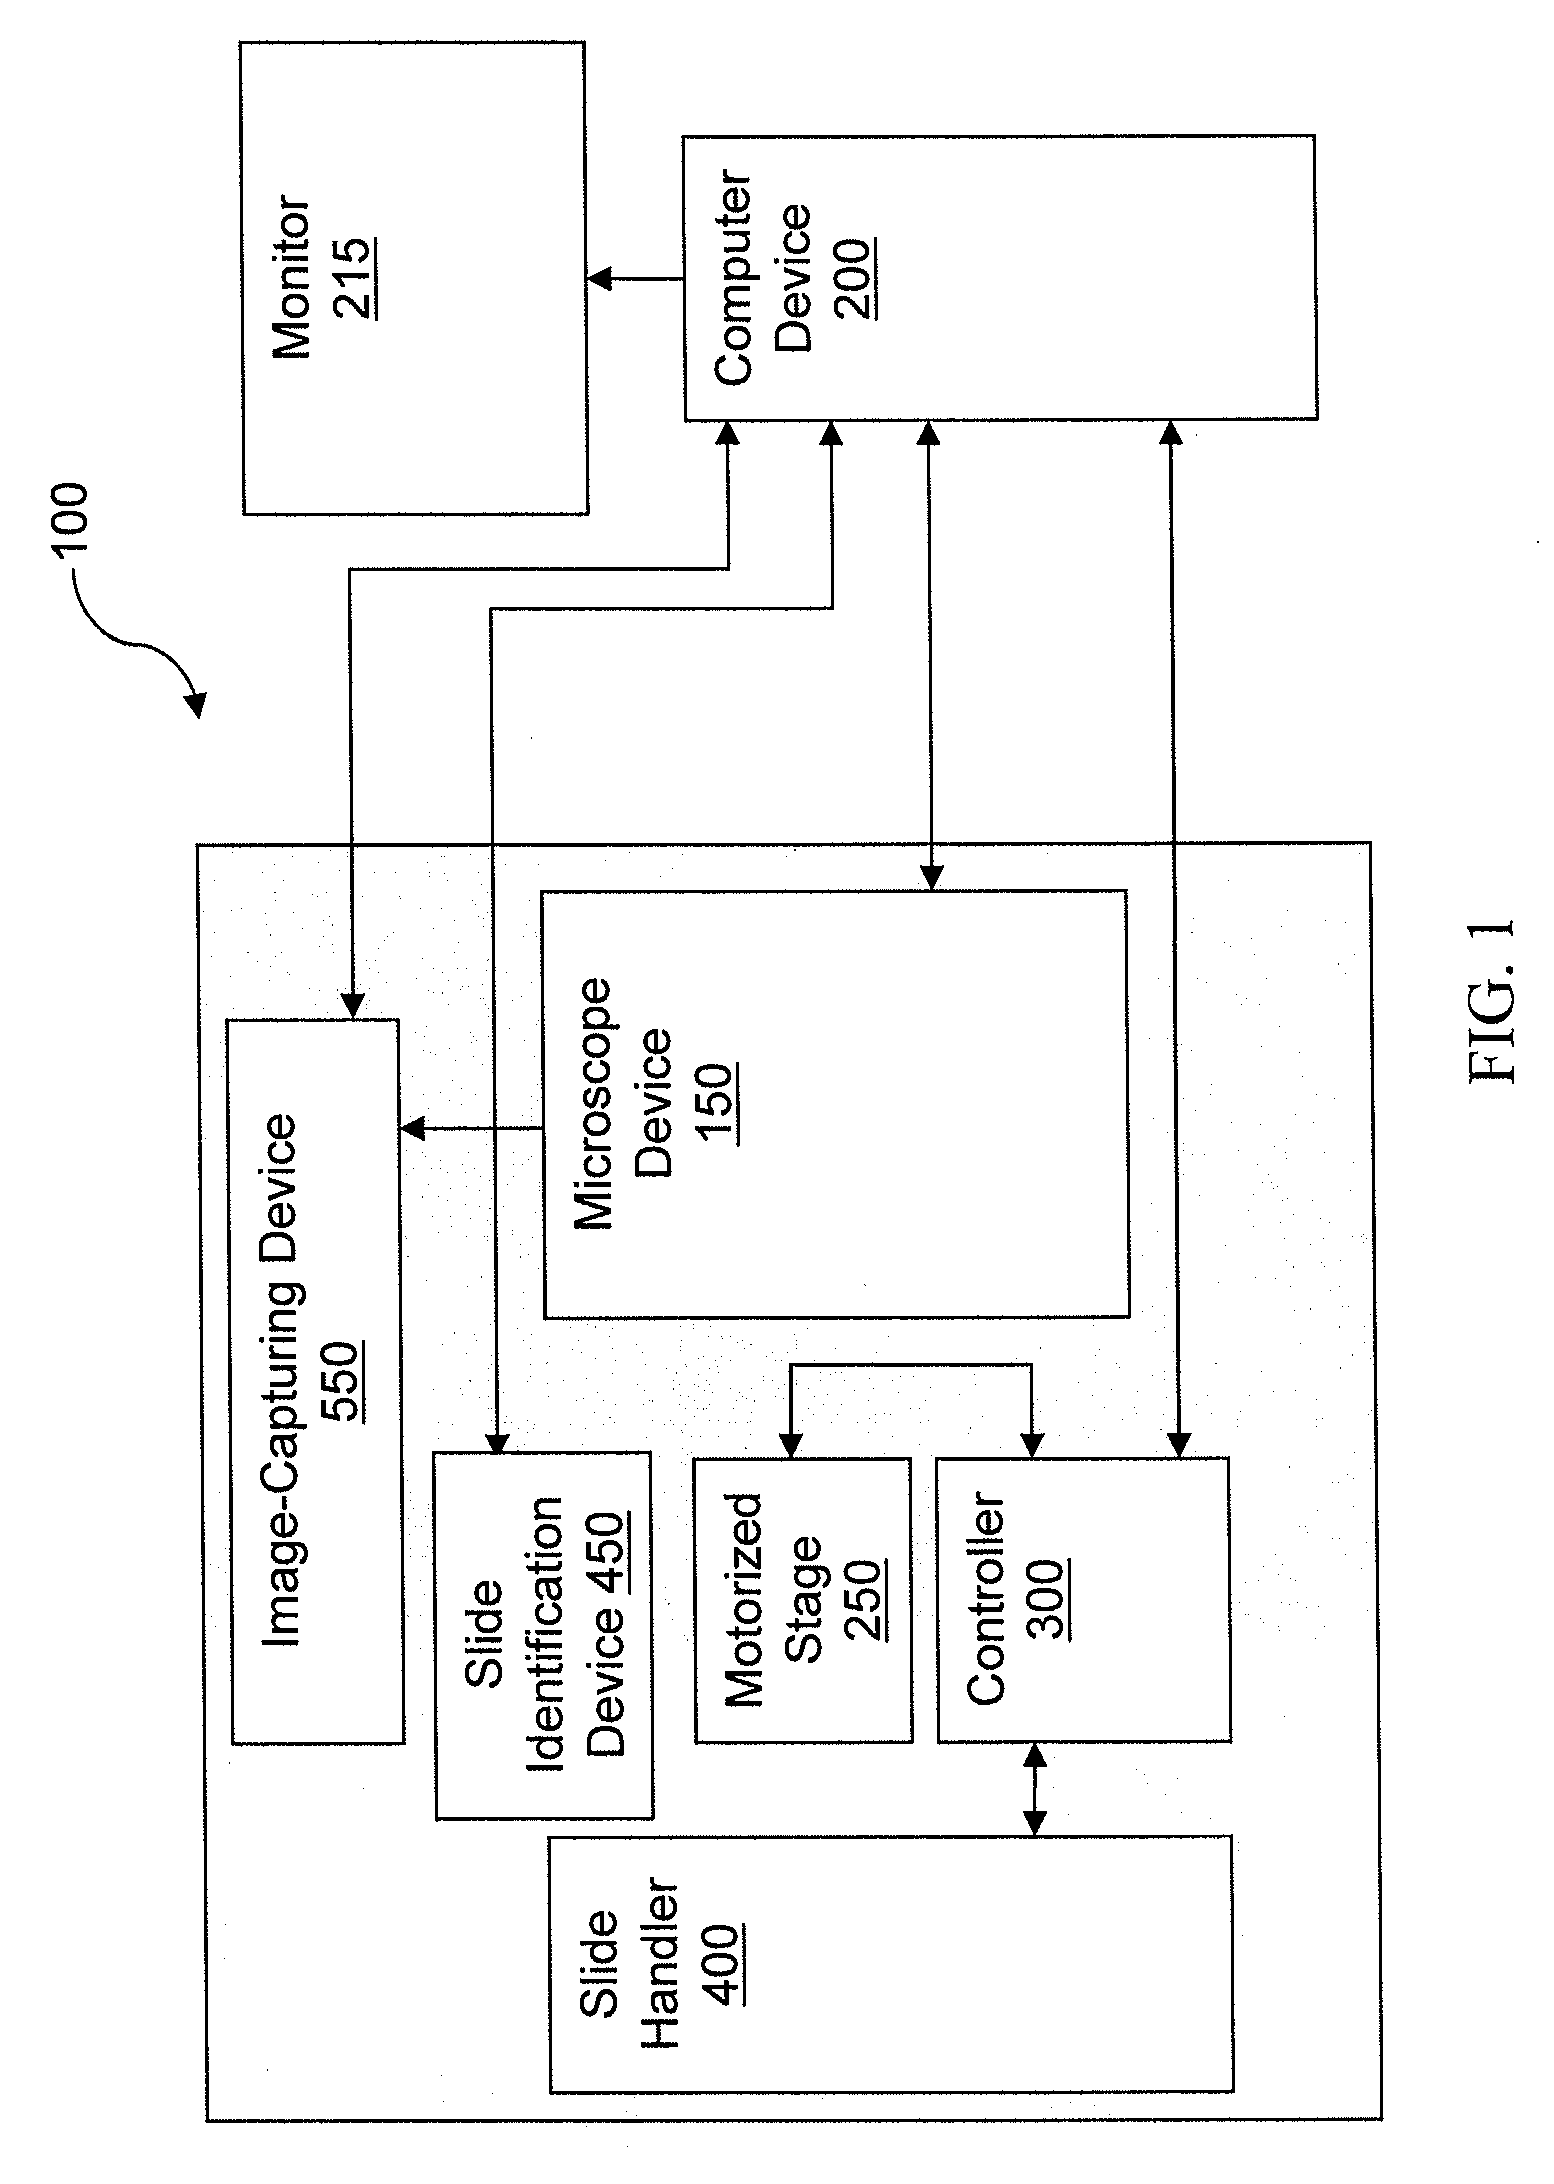 Microscopy system having automatic and interactive modes for forming a magnified mosaic image and associated method